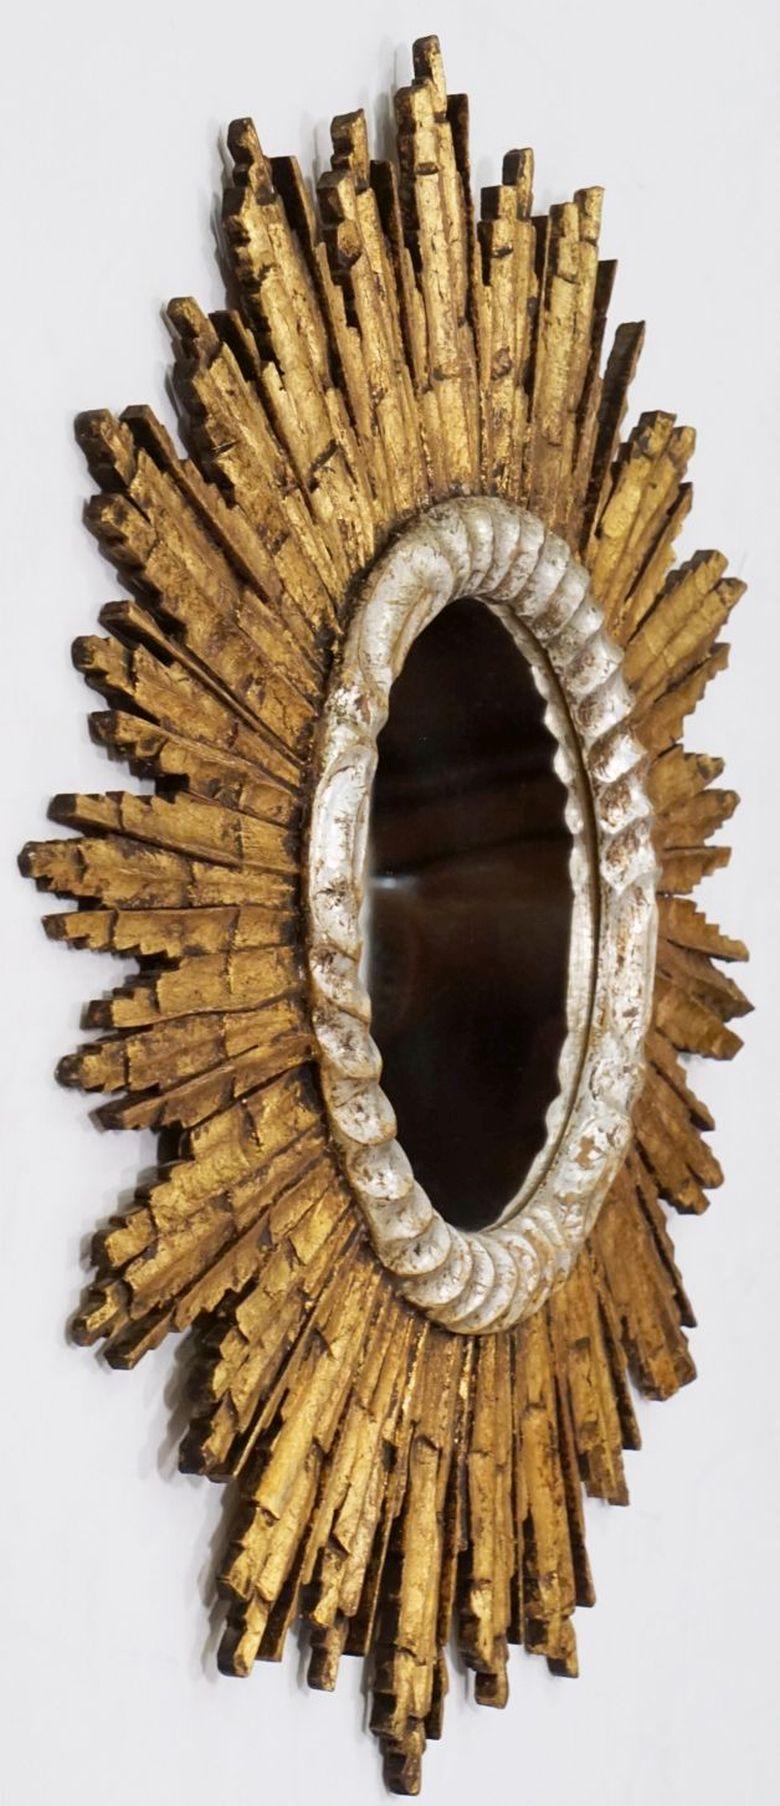 A lovely French gilt sunburst (or starburst) mirror, 25 inches diameter, with round mirrored glass center in a moulded silver-leaf and gold-leaf frame.